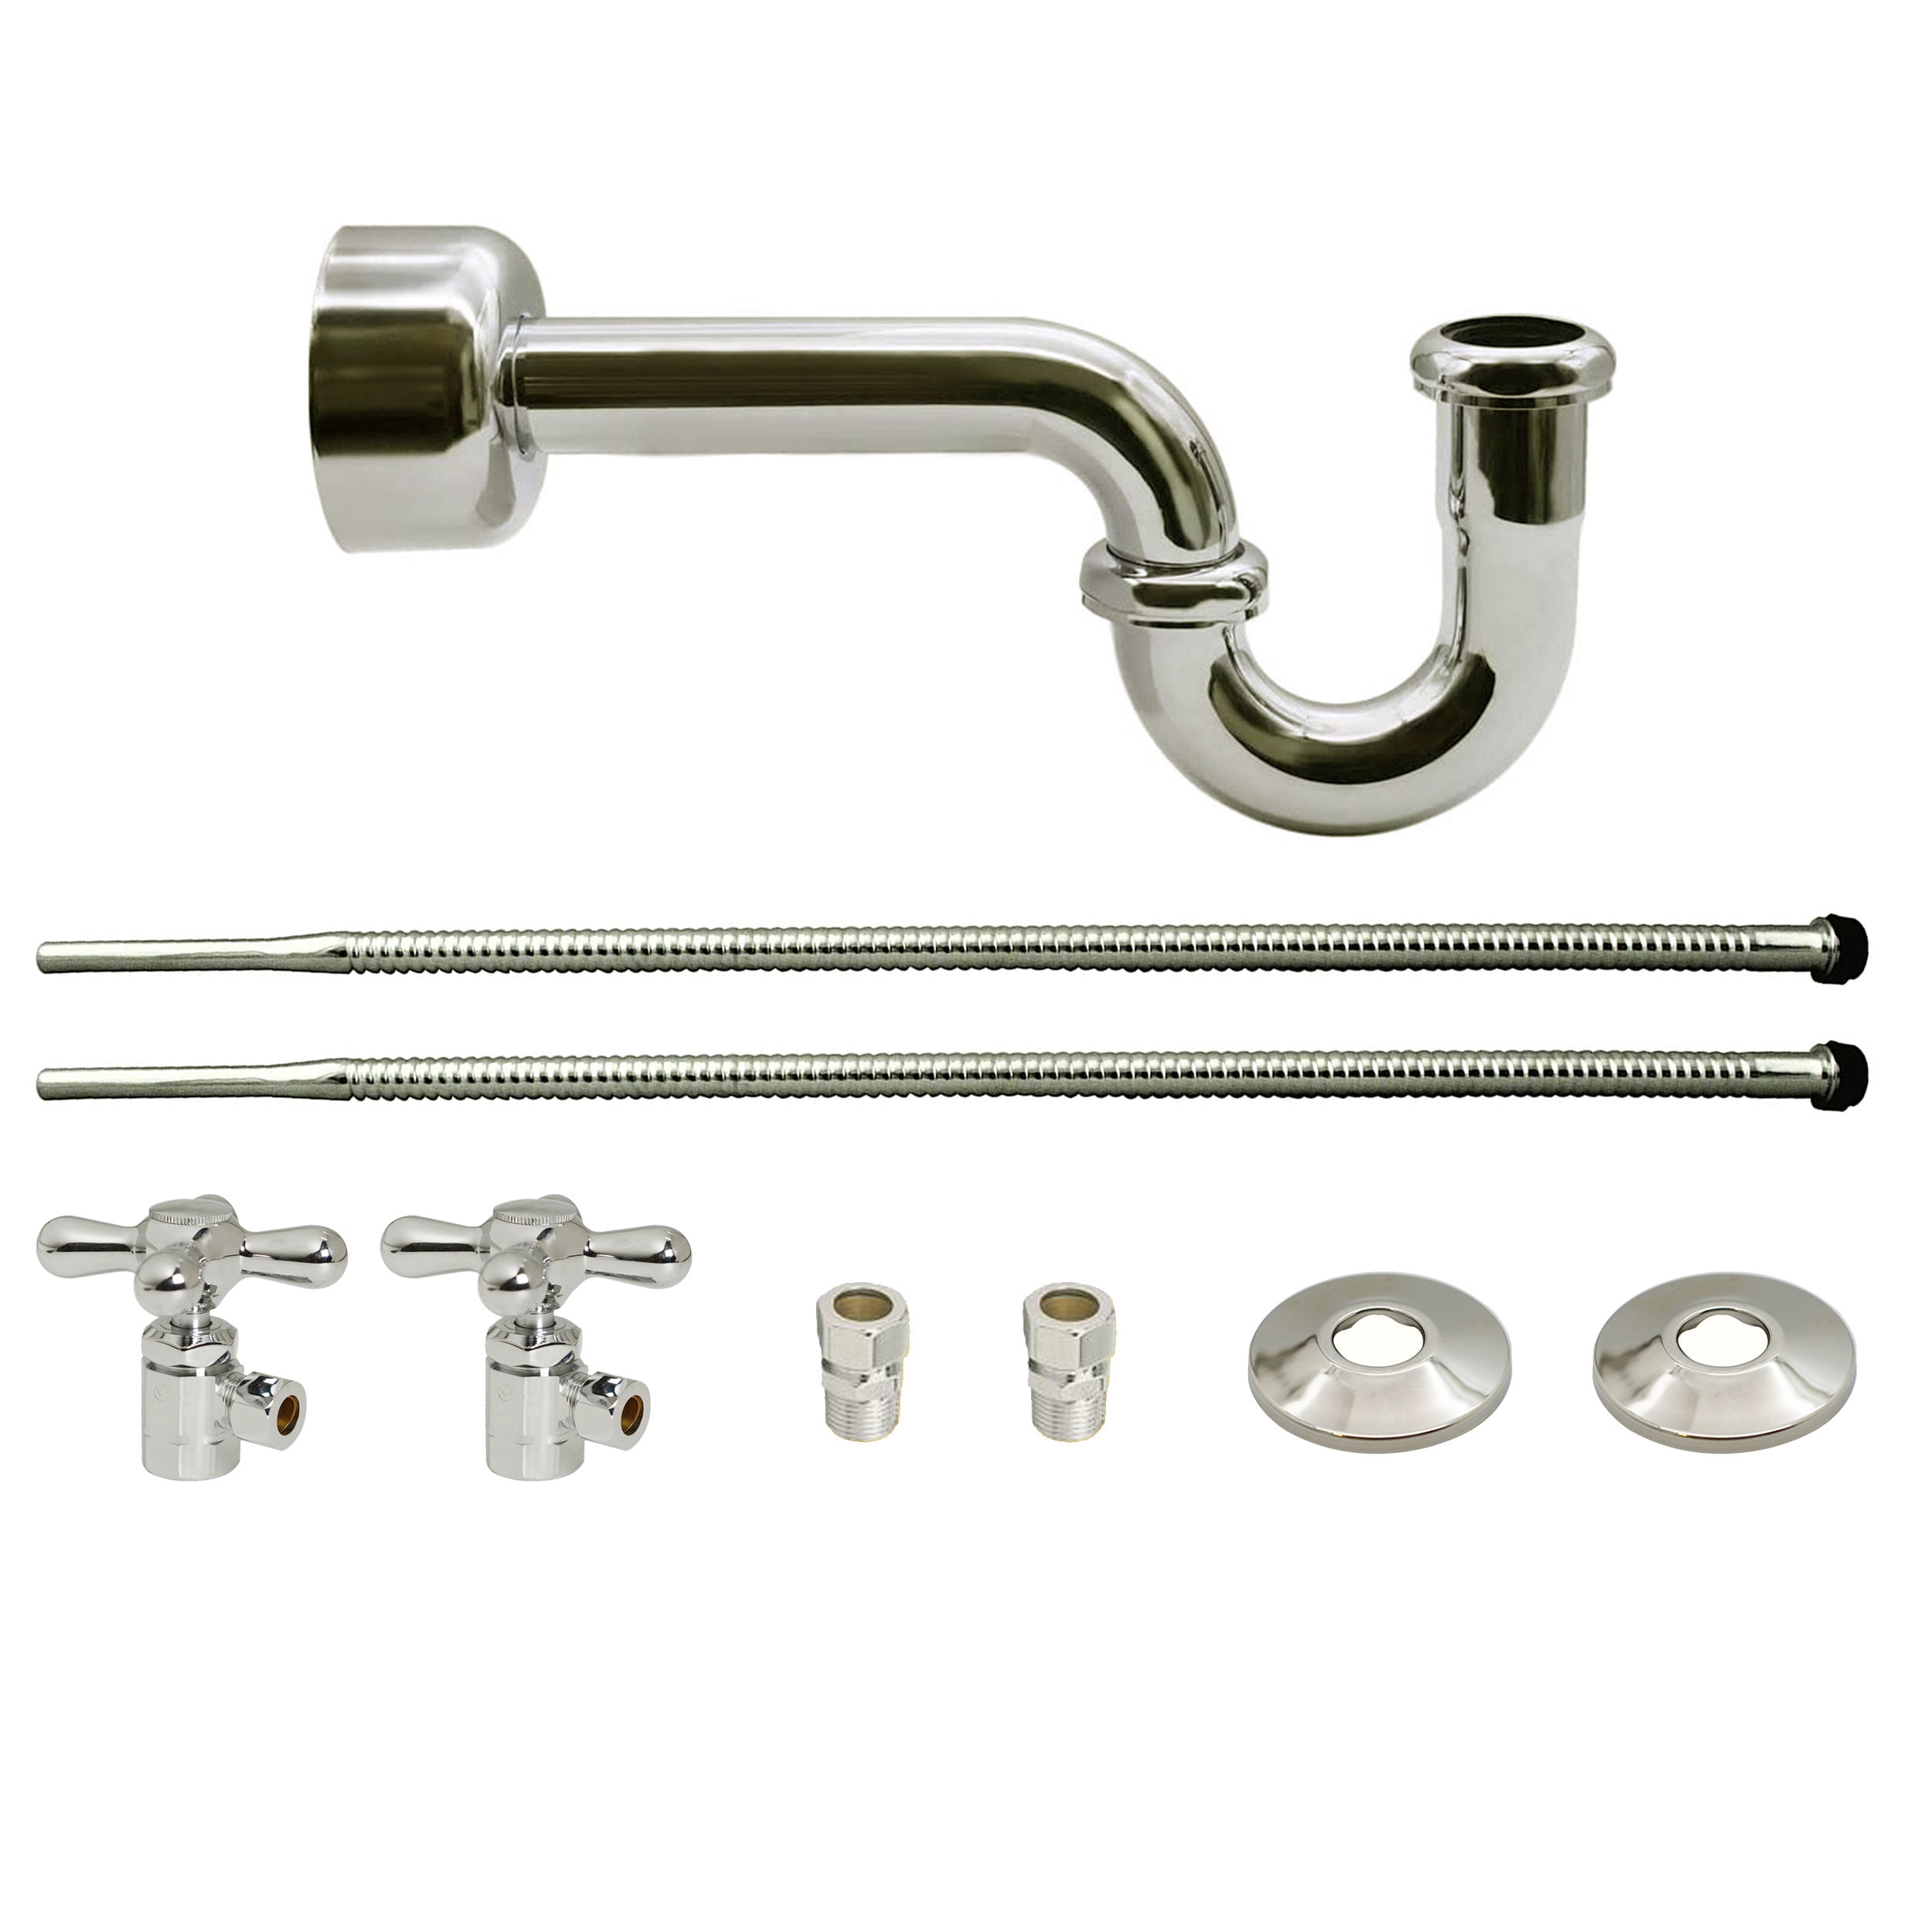 Westbrass D1738L-05 Pedestal Sink Kit with Supply Lines, P-Trap, Flanges and Cross Handle Angle Stops, Polished Nickel